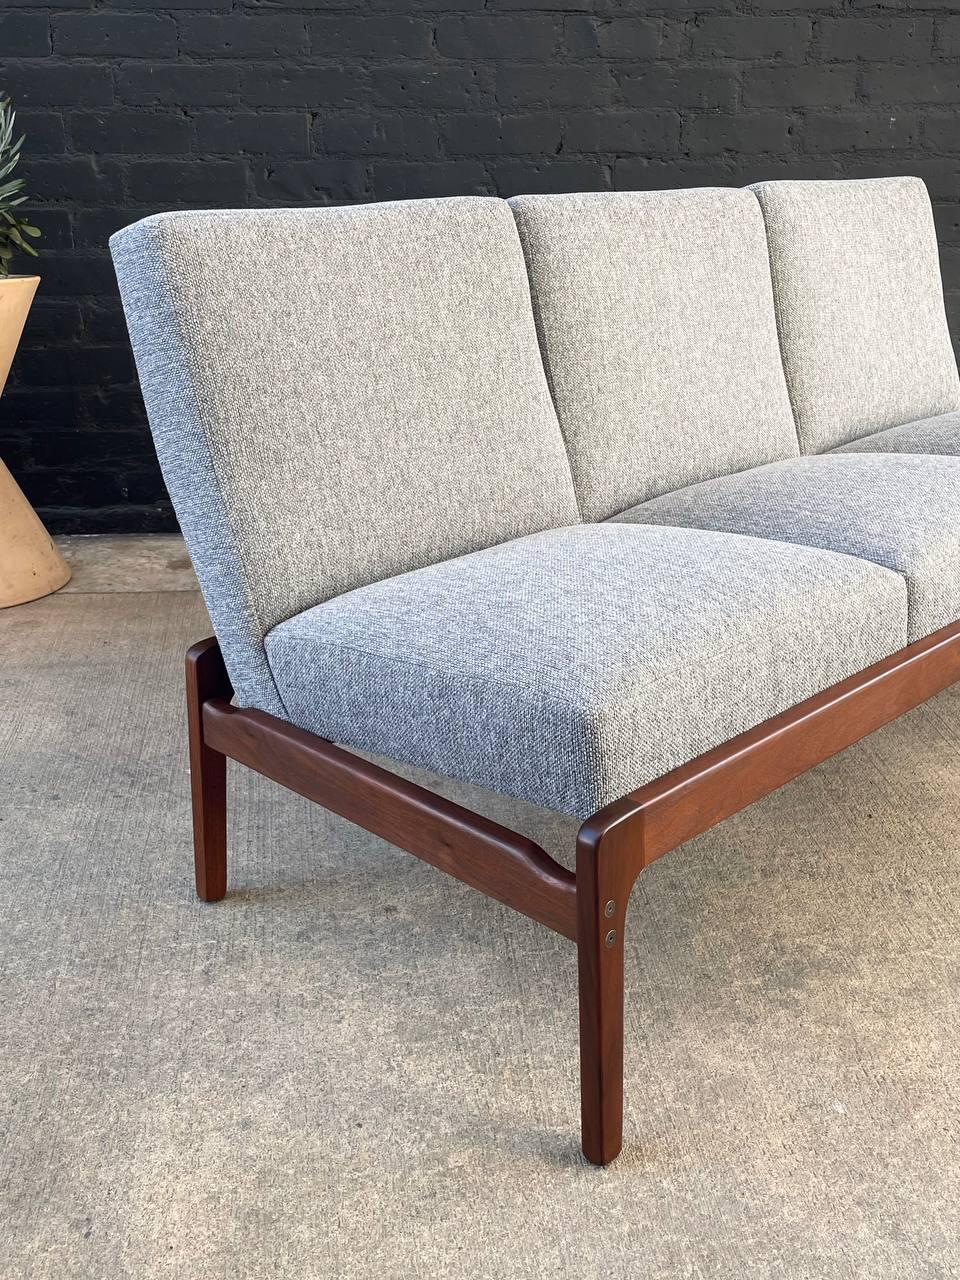 Newly Refinished - Mid-Century Modern Sculpted Walnut & New Tweed Fabric Sofa For Sale 1